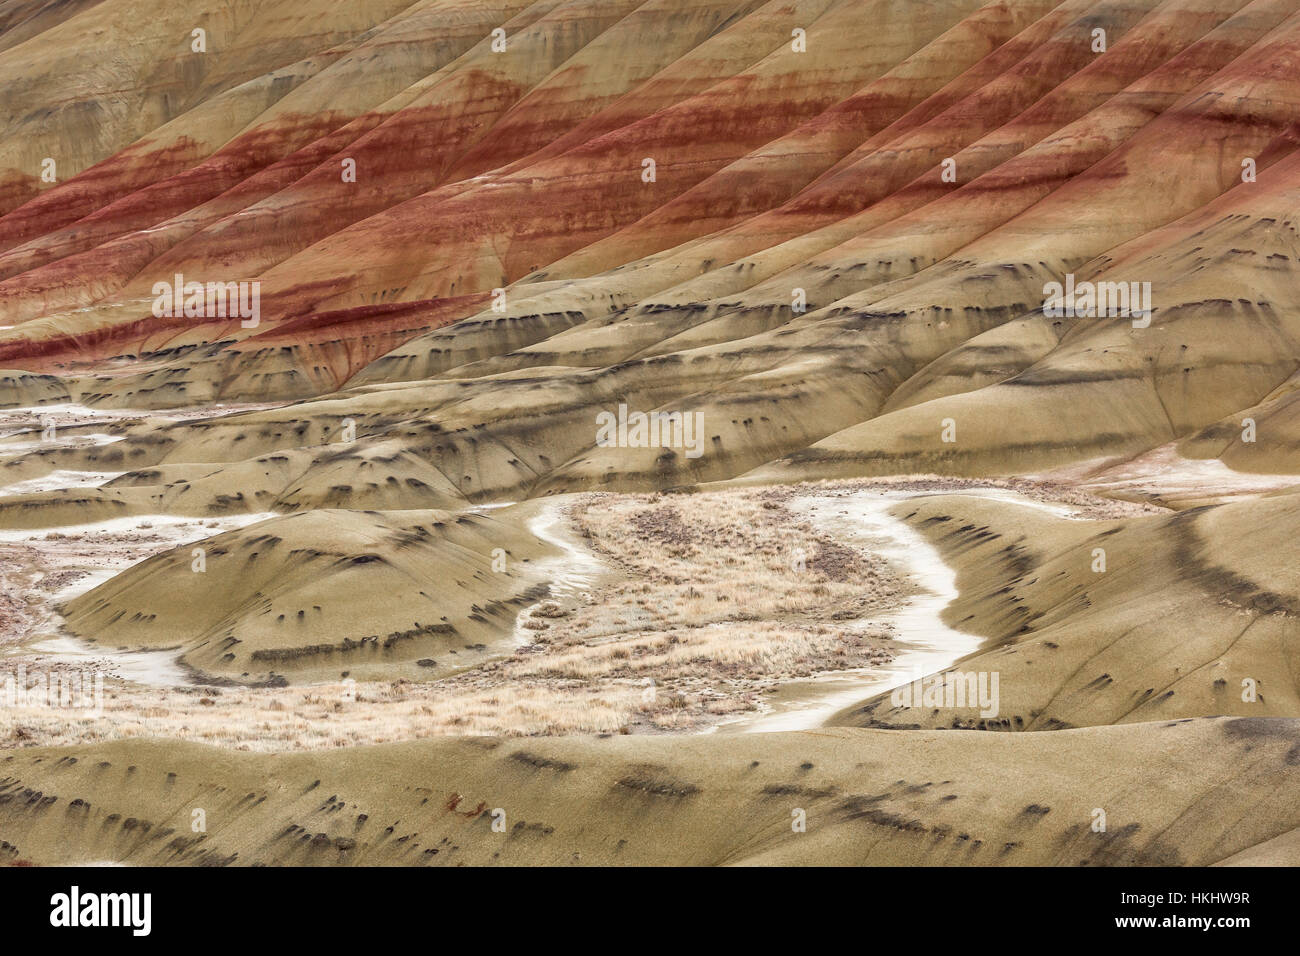 Colored deposits of Lower John Day Formation in the Painted Hills Unit of John Day Fossil Beds National Monument, Oregon, USA Stock Photo